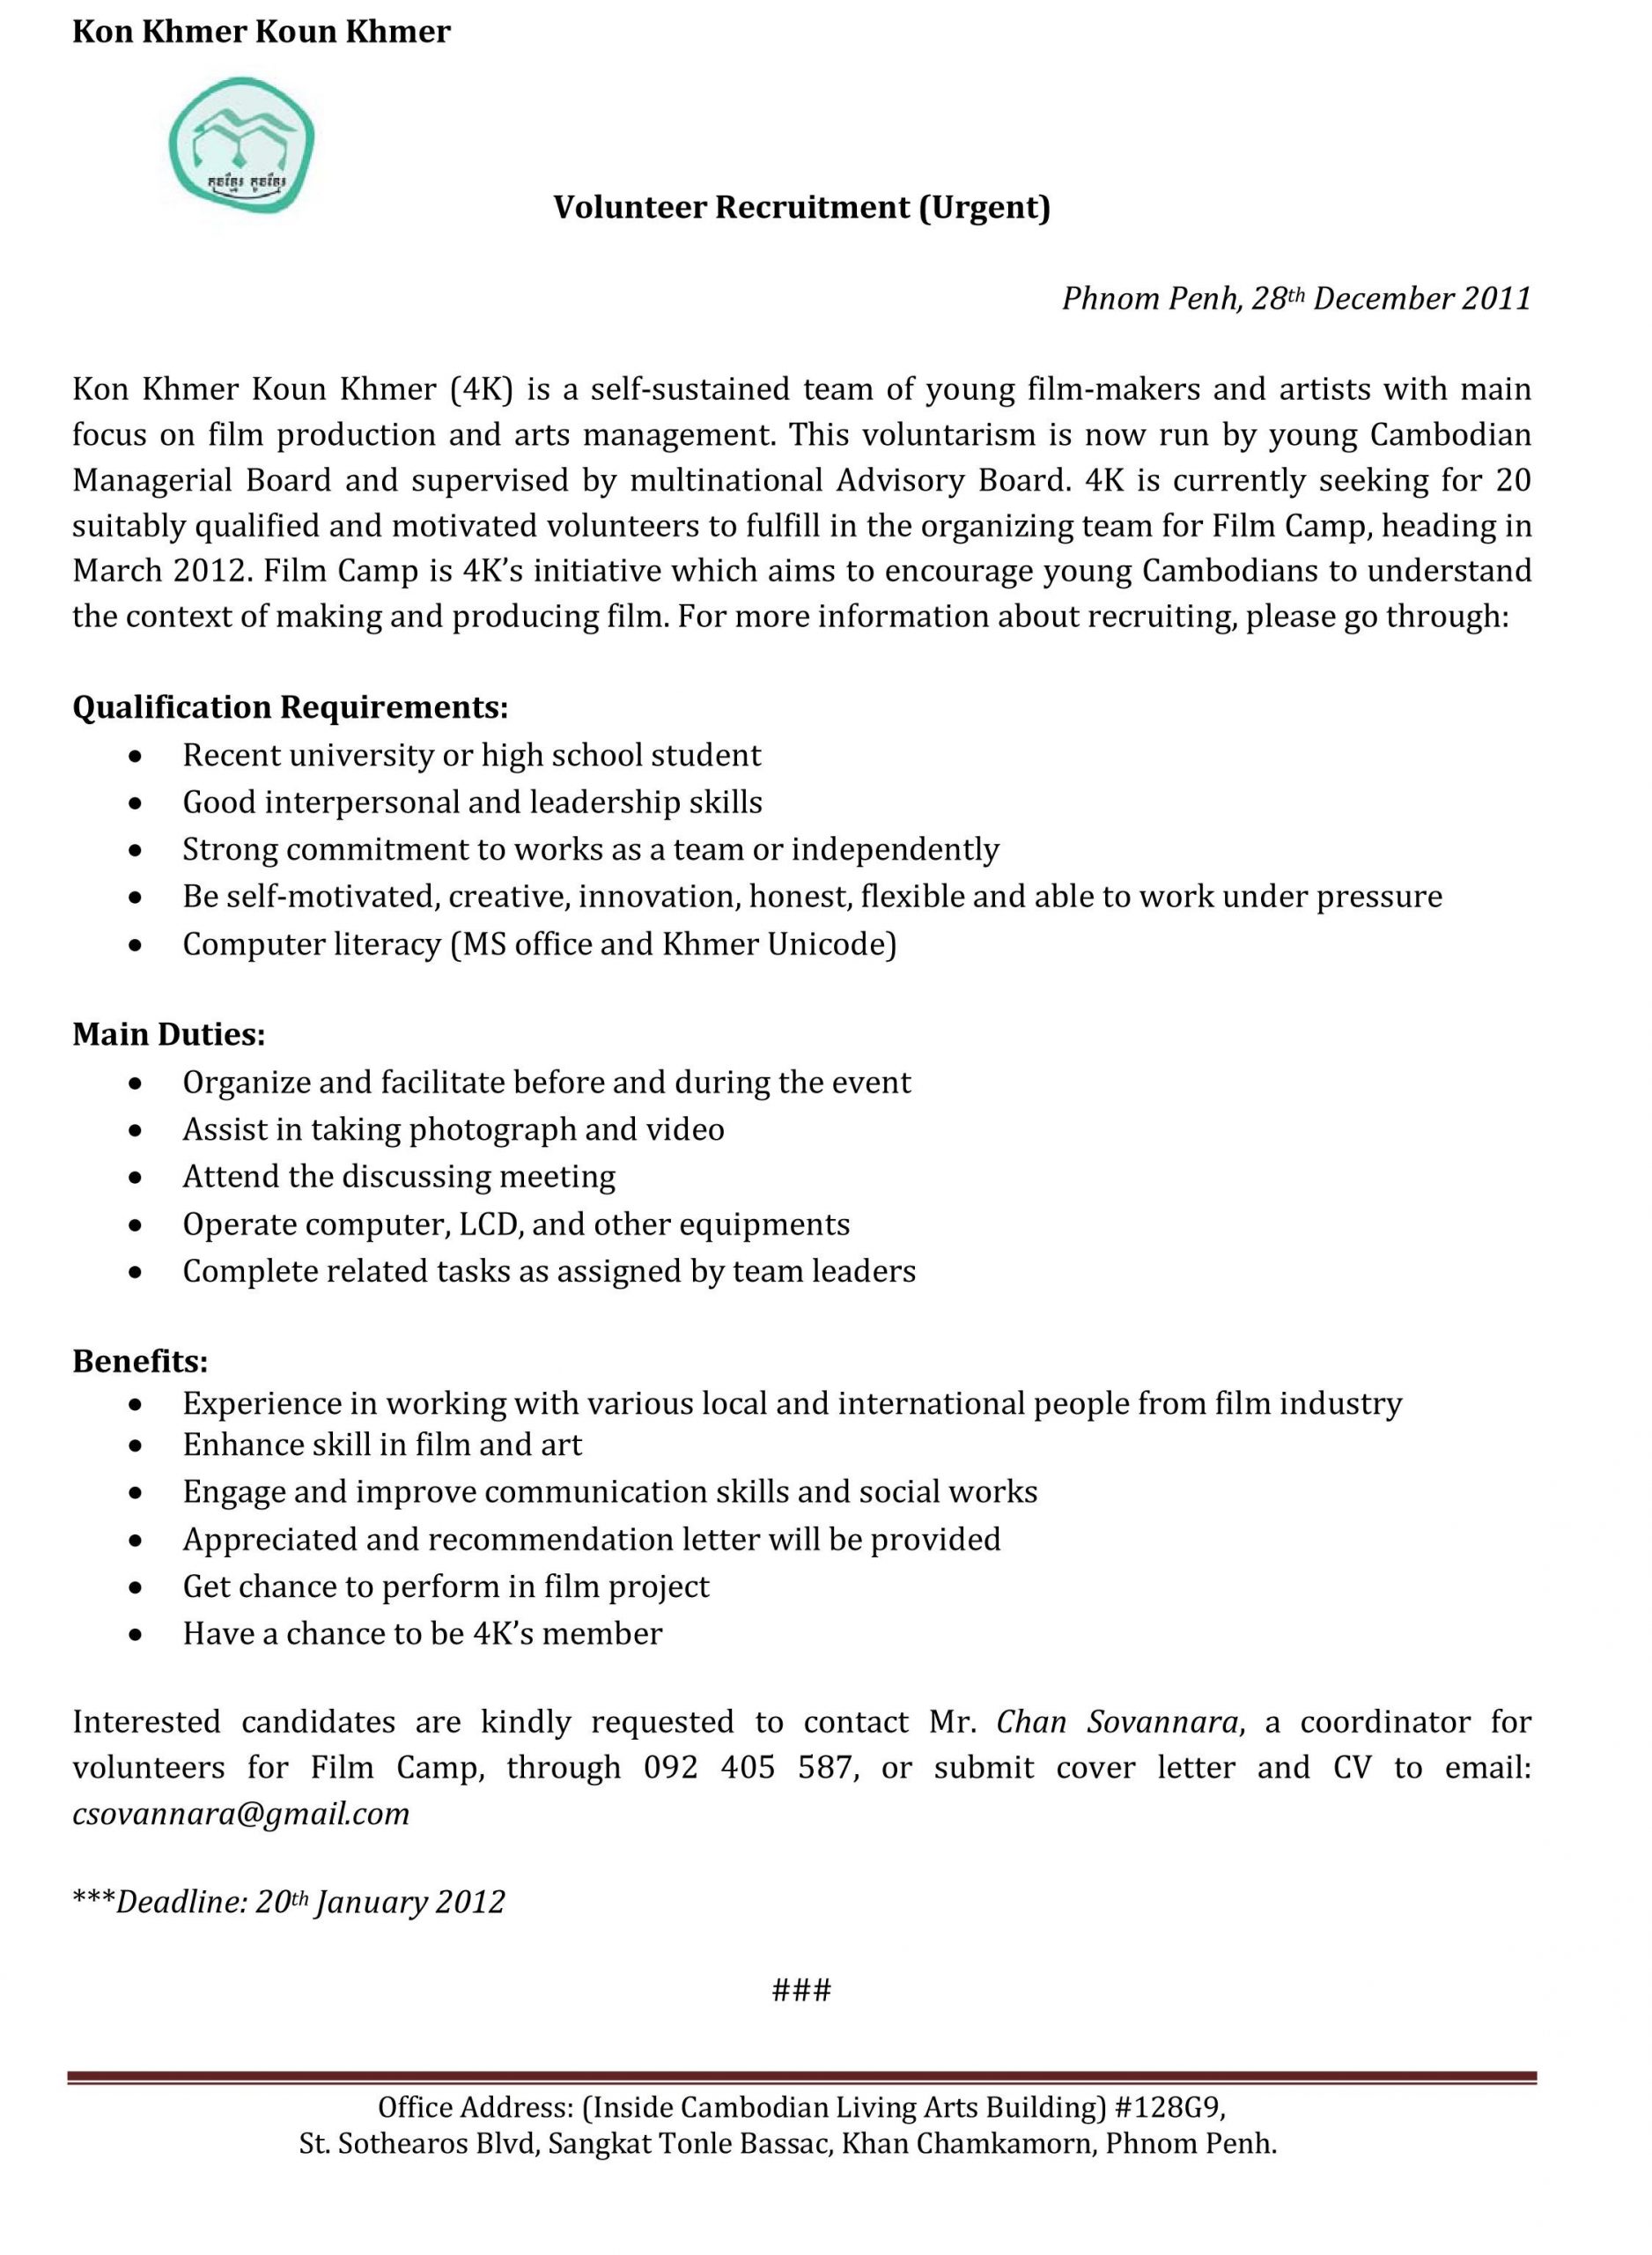 Sample Application Letter For Volunteer Position within size 2248 X 3067